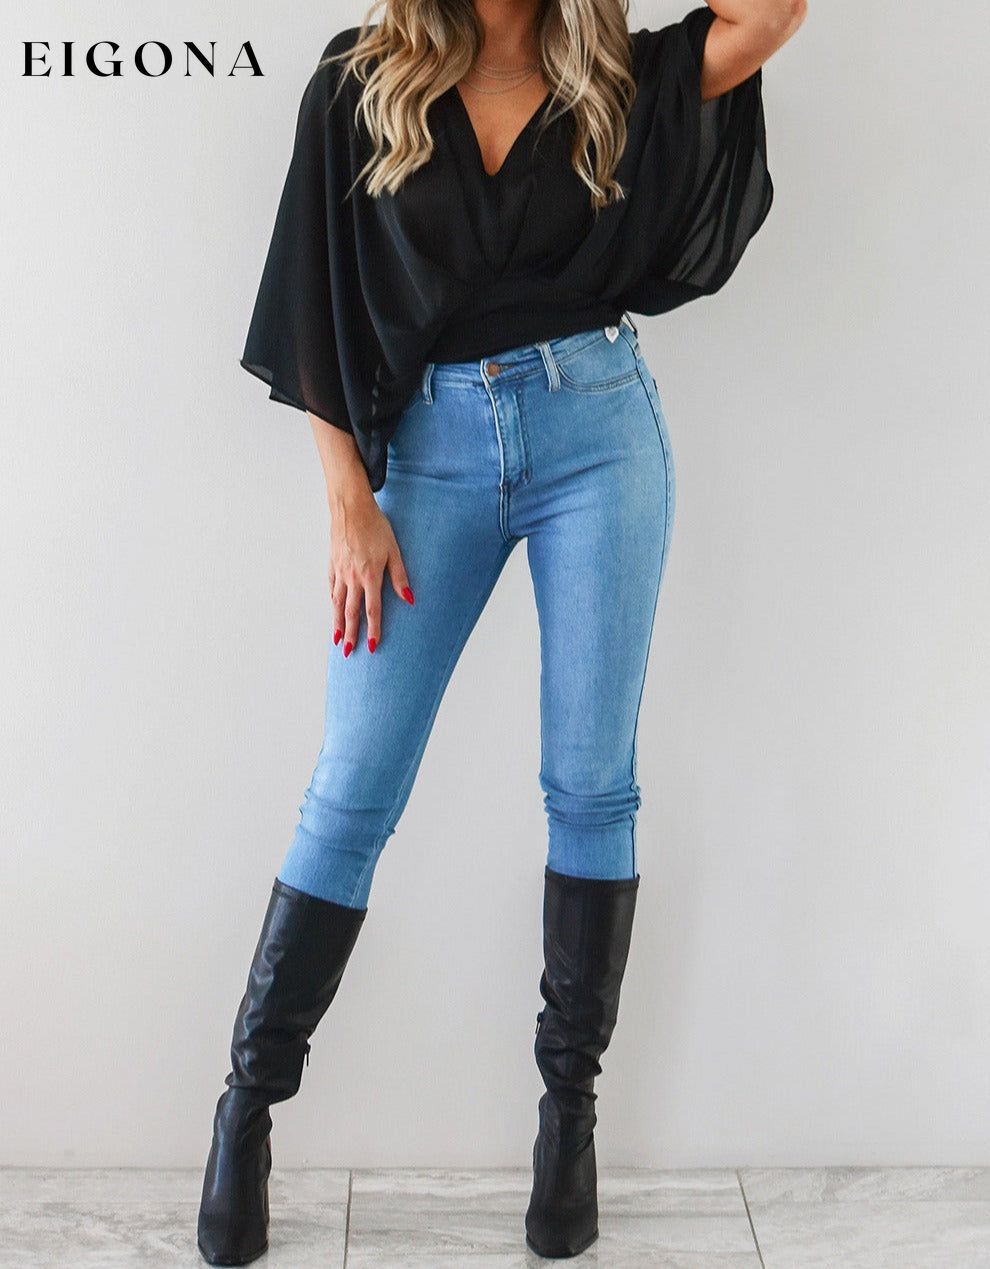 Black V Neck Flared Sleeves Crop Top clothes crop top crop tops cropped cropped top croptop long sleeve top Occasion Daily Print Solid Color Season Summer shirt shirts top tops